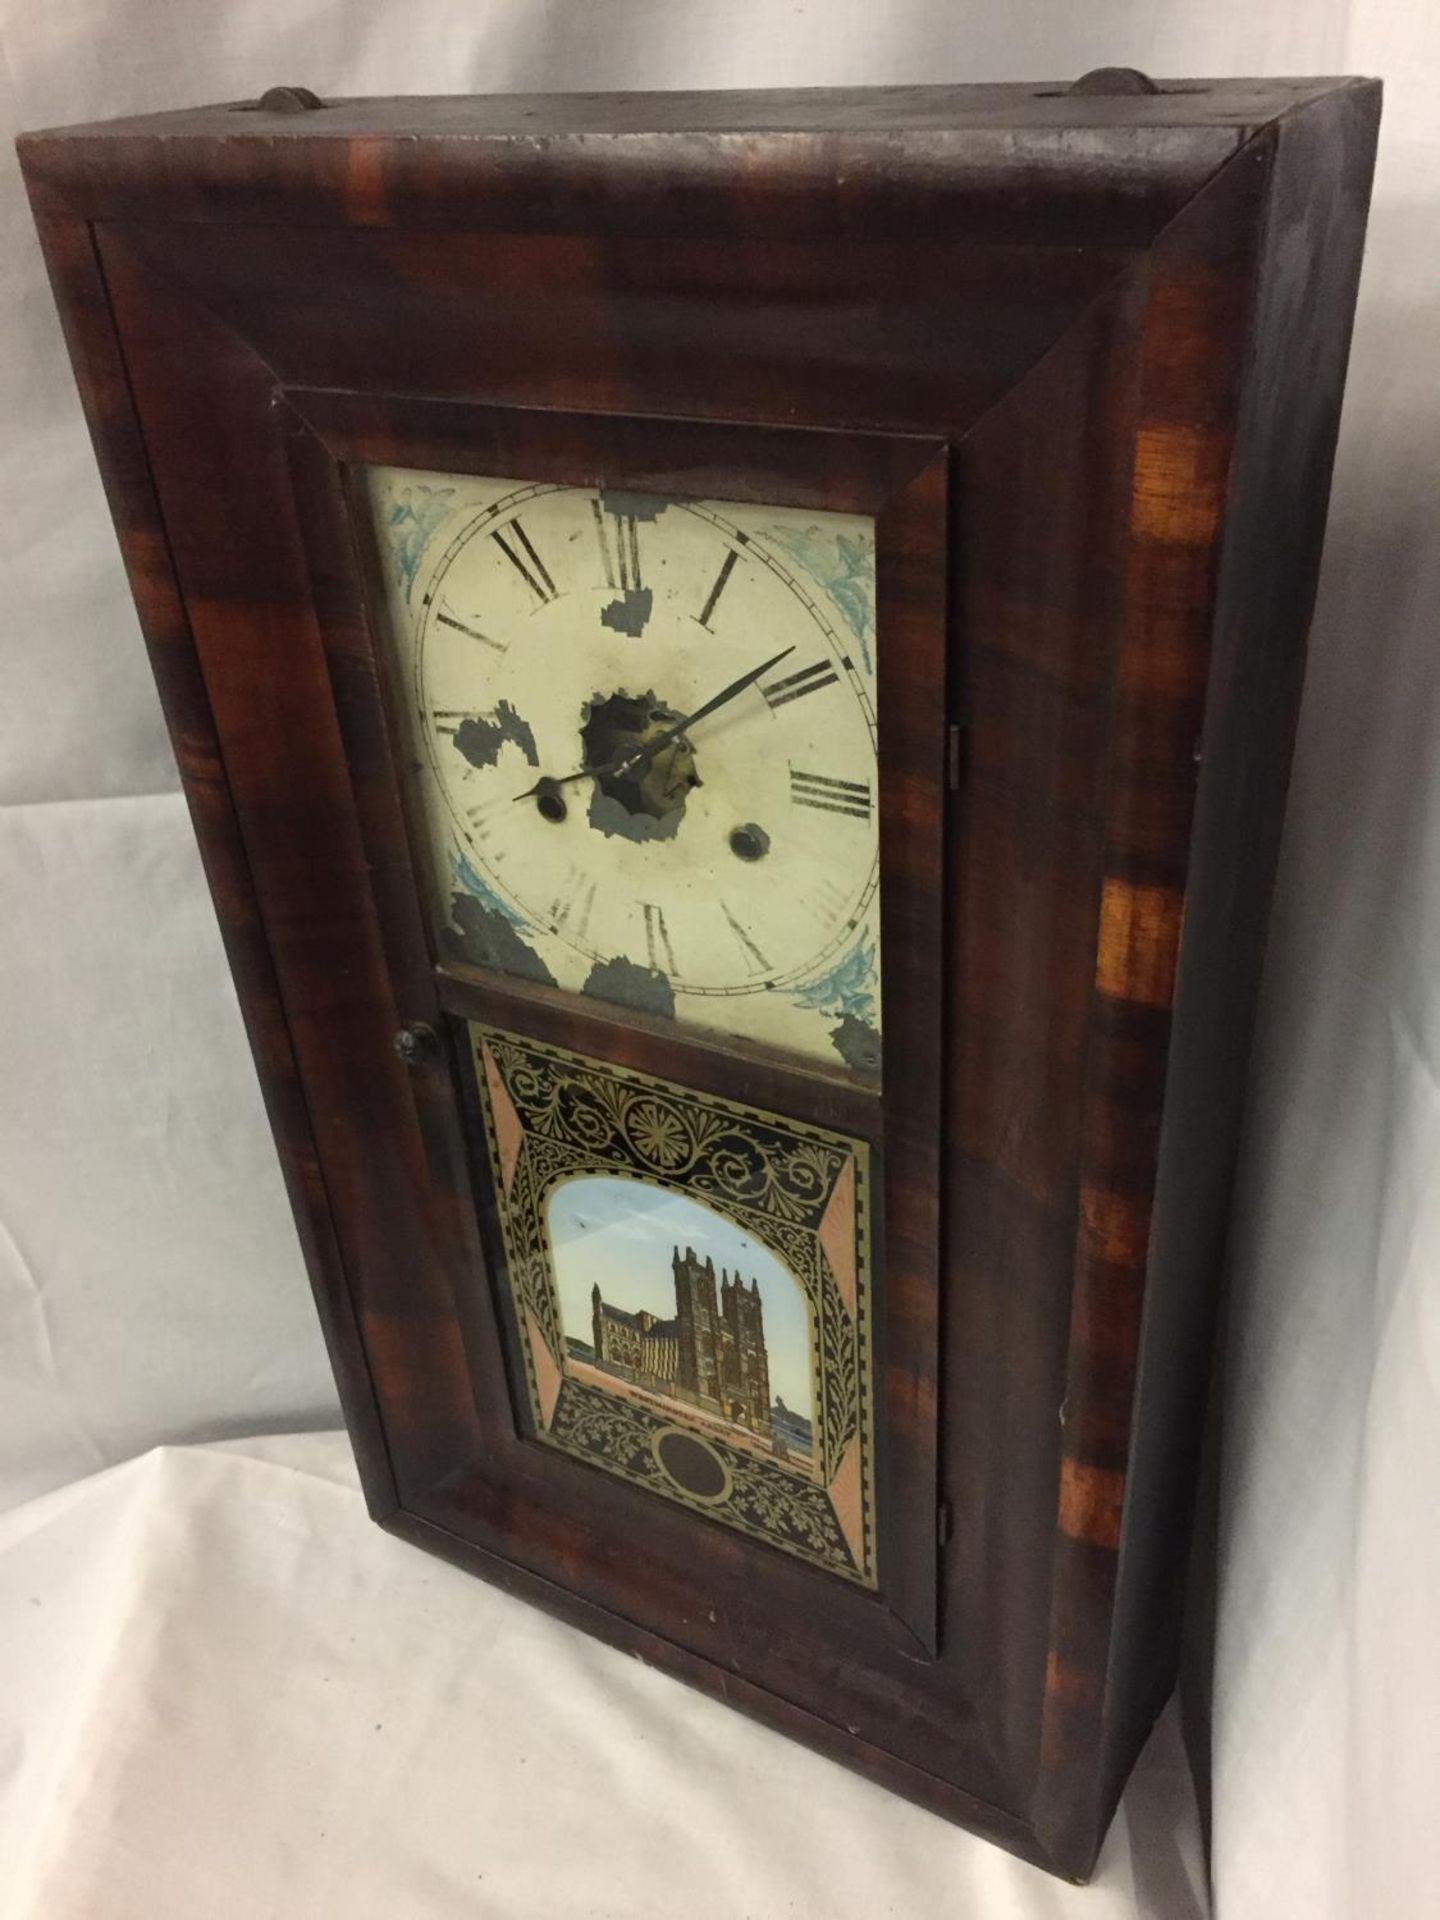 AN AMERICAN THIRTY HOUR WALL CLOCK BY JEROME AND CO IN WORKING ORDER BUT NO WARRANTY - Image 2 of 5